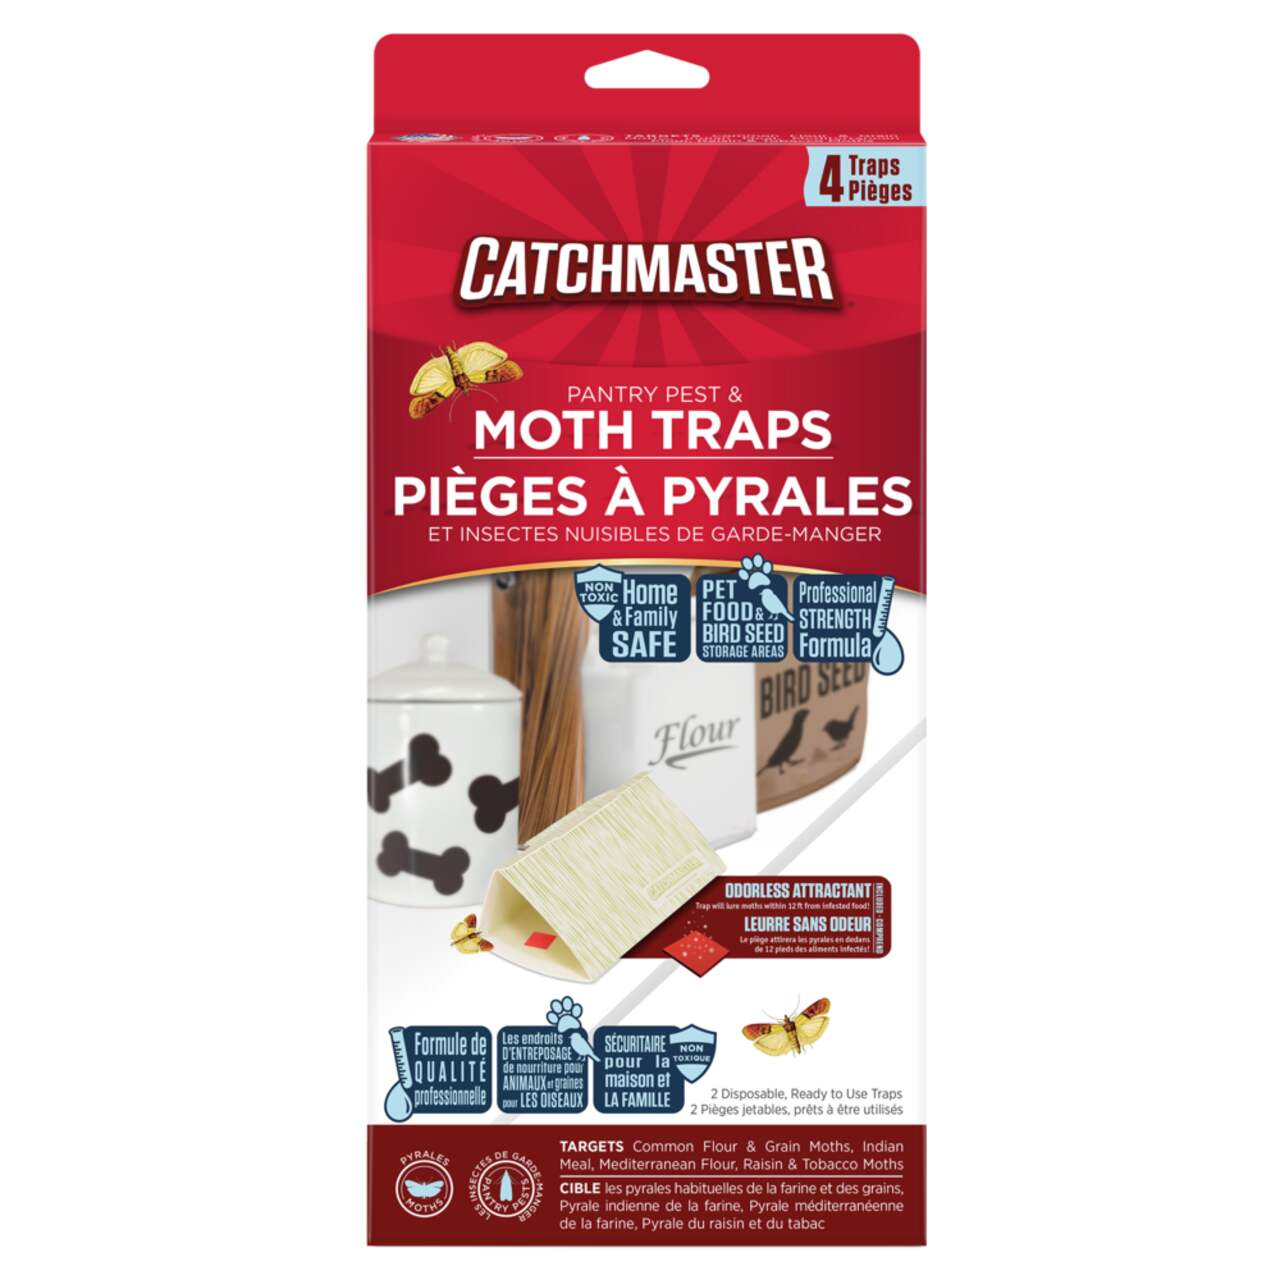 https://media-www.canadiantire.ca/product/seasonal-gardening/gardening/weed-insect-rodent-control/0599346/catchmaster-moth-trap-4pk-8670b0b4-6584-49be-b4d1-efdae4eb308d.png?imdensity=1&imwidth=640&impolicy=mZoom